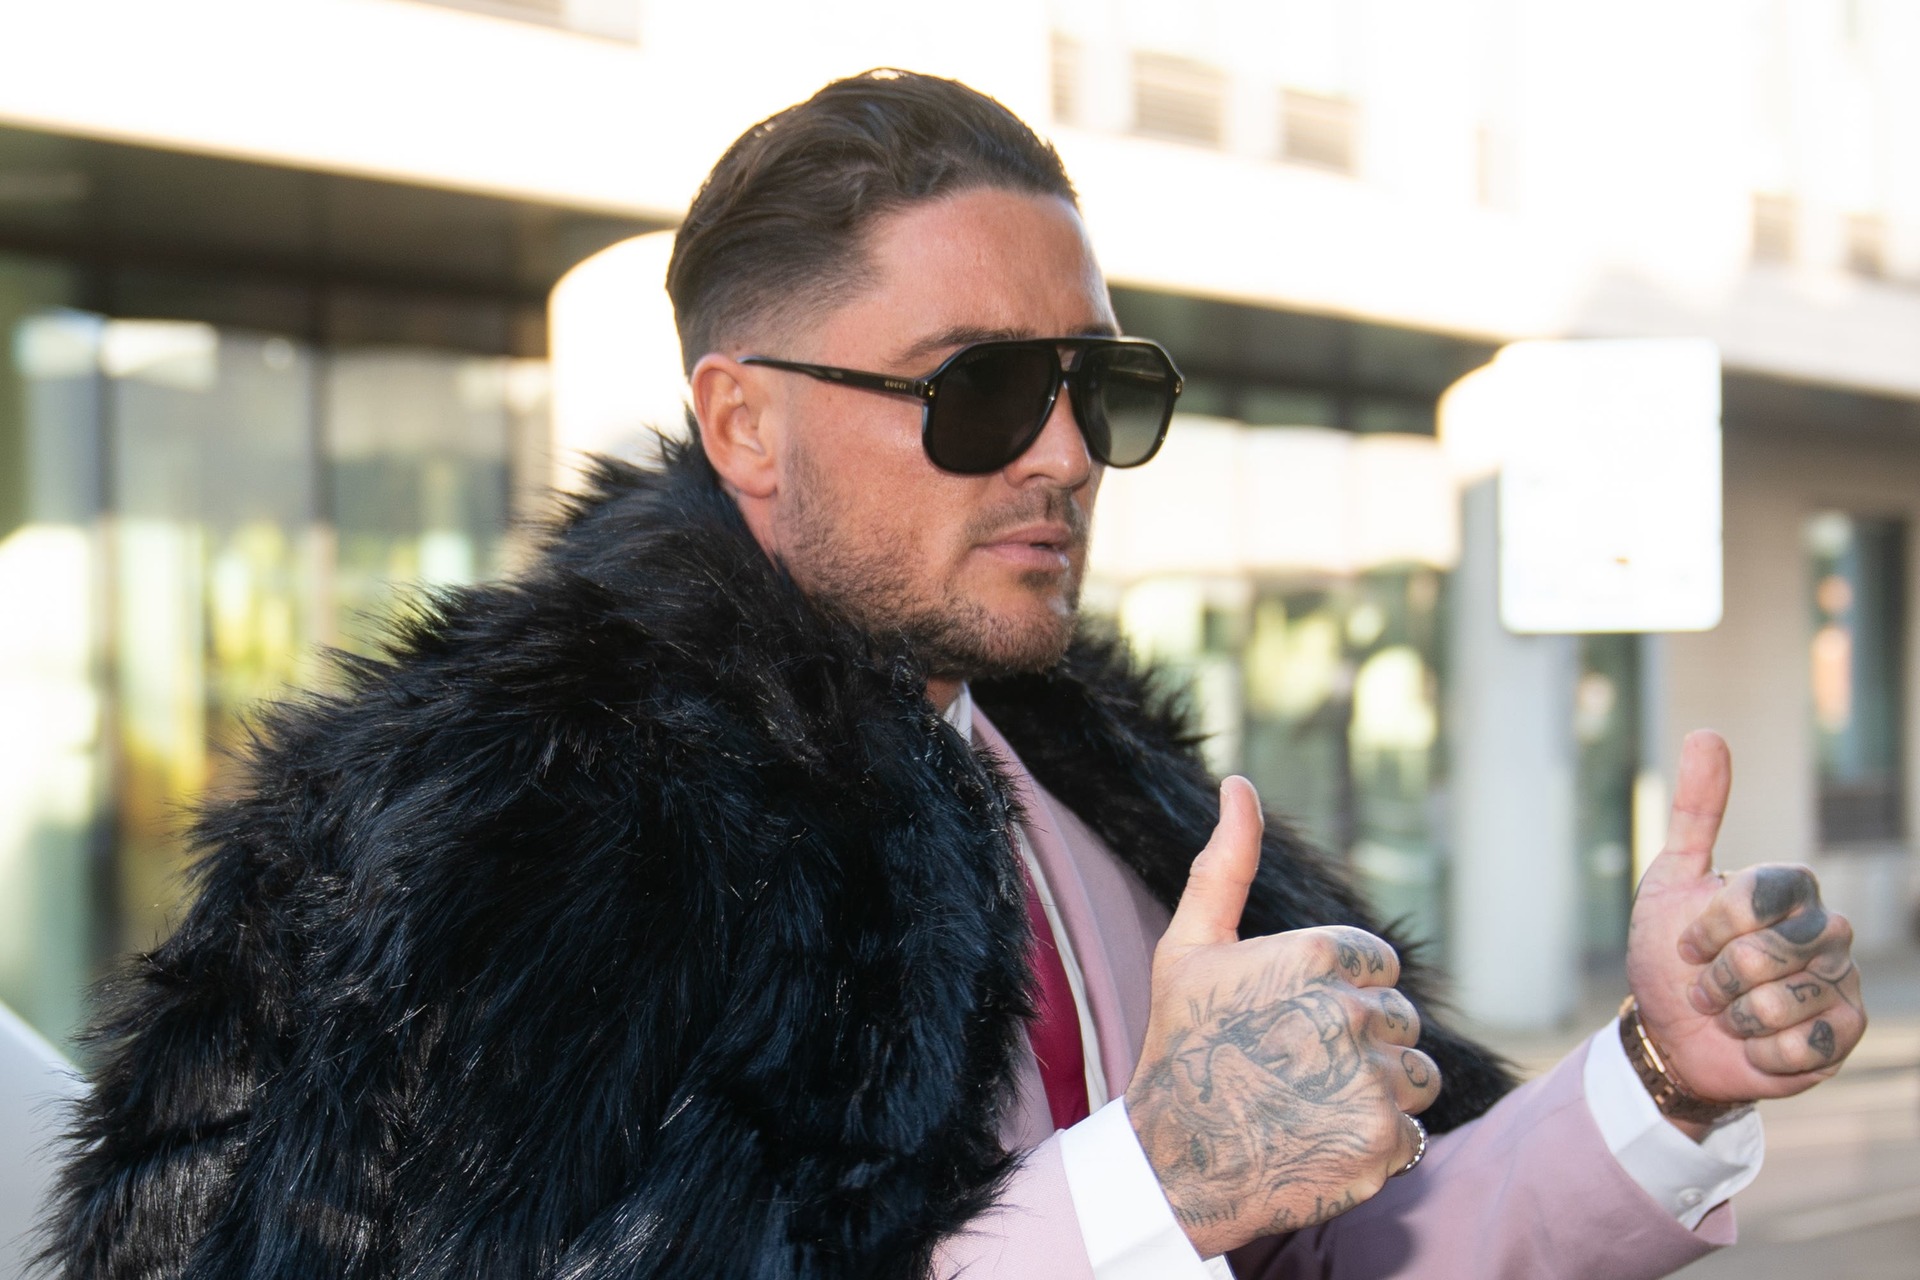 Reality TV personality Stephen Bear attended his trial at Chelmsford Crown Court in a hired white Rolls Royce.